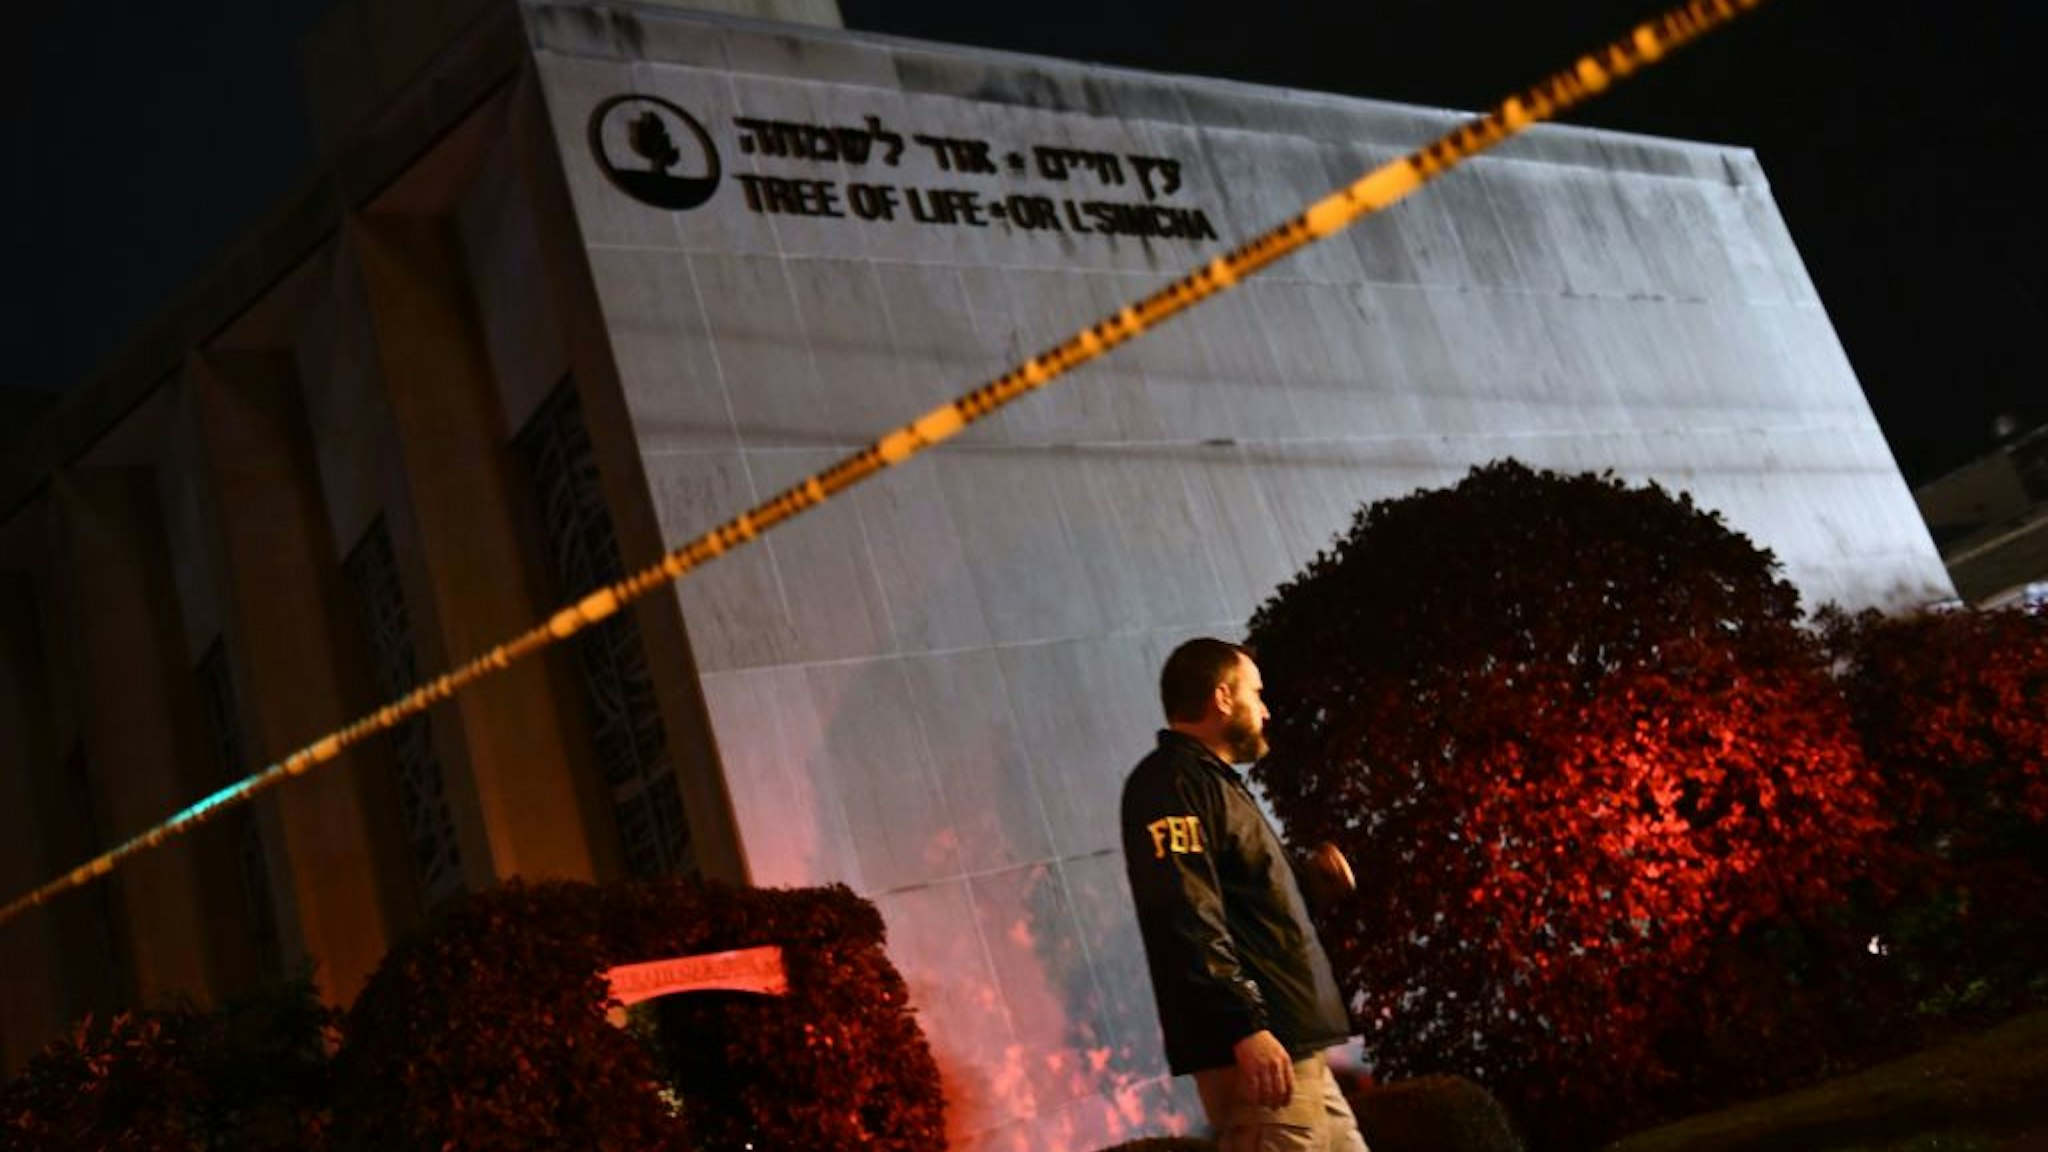 TOPSHOT - An FBI agent stands behind a police cordon outside the Tree of Life Synagogue after a shooting there left 11 people dead in the Squirrel Hill neighborhood of Pittsburgh on October 27, 2018. - A heavily armed gunman opened fire during a baby-naming ceremony at a synagogue in the US city of Pittsburgh on October 27, killing 11 people and injuring six in the deadliest anti-Semitic attack in recent American history. (Photo by Brendan Smialowski / AFP) (Photo credit should read BRENDAN SMIALOWSKI/AFP via Getty Images)